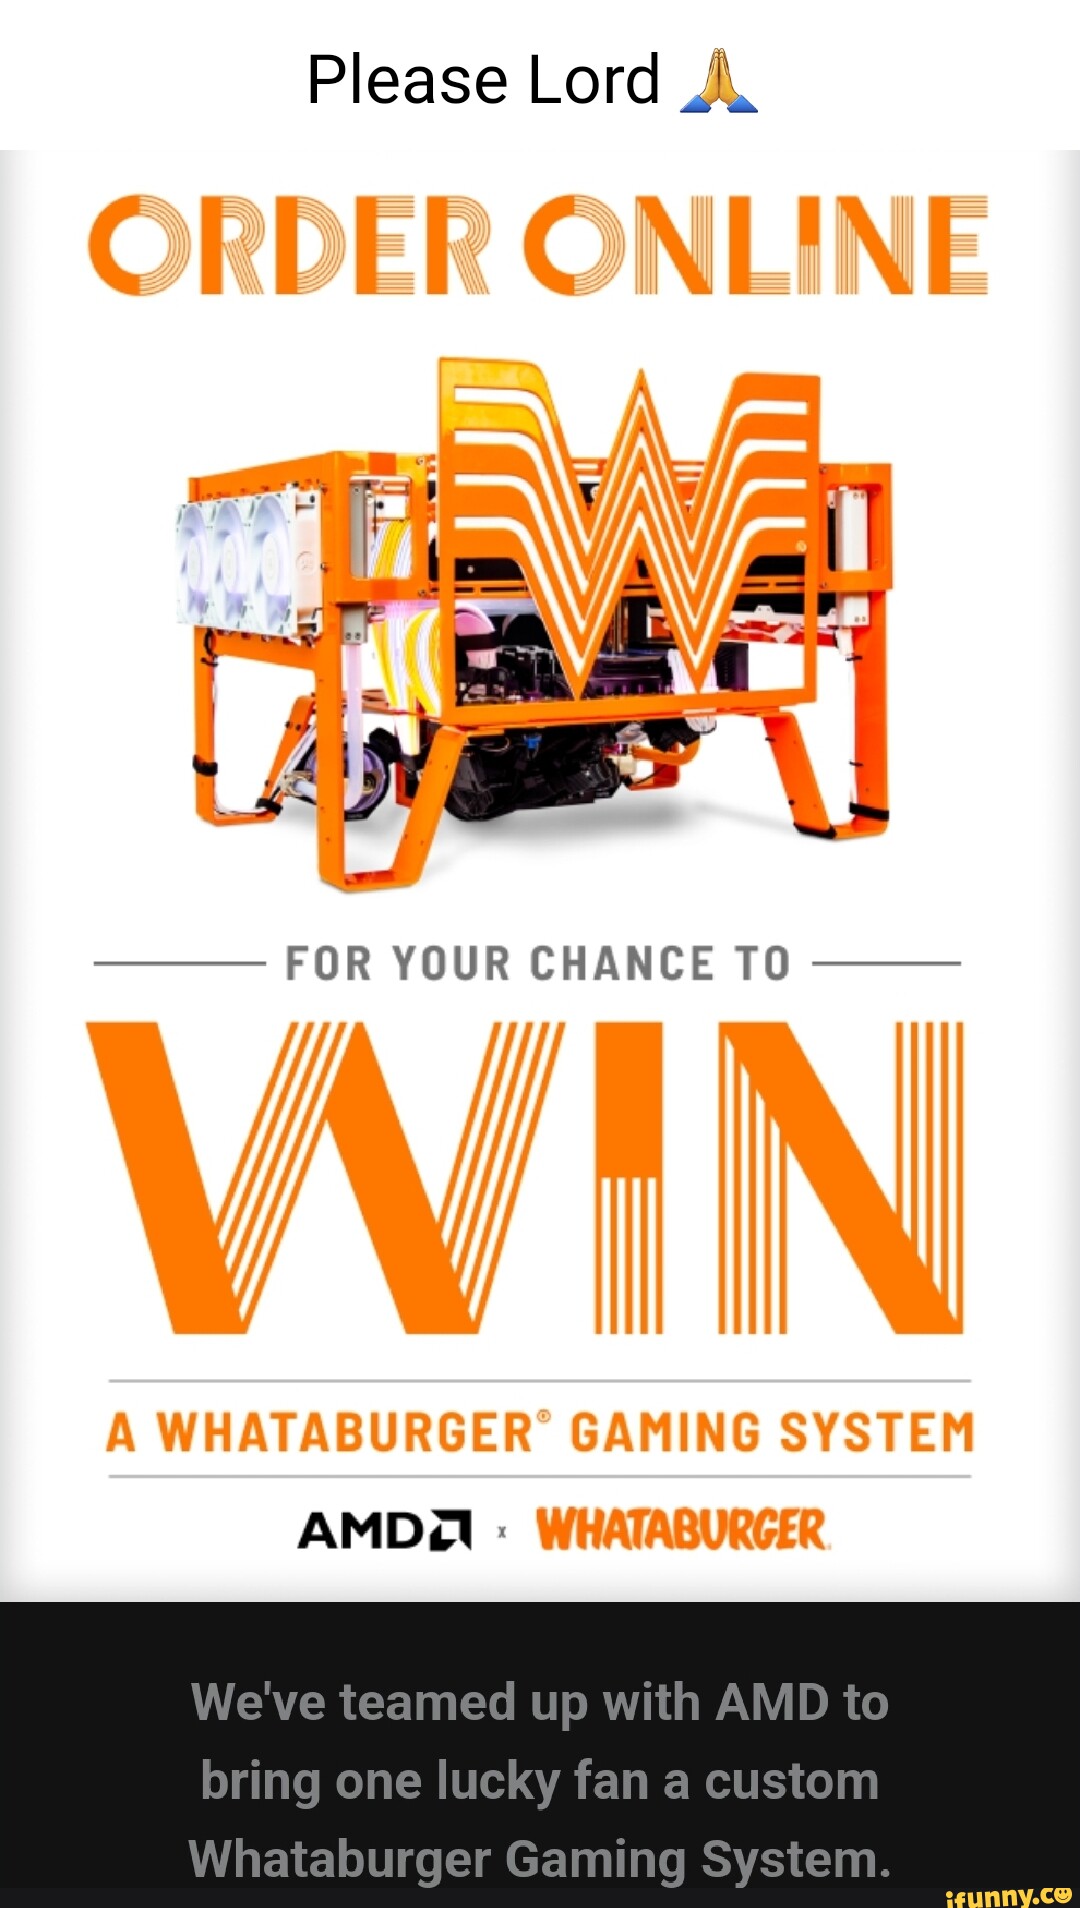 Please Lord ON FOR YOUR CHANCE TO WHATABURGER GAMING SYSTEM AMD We've